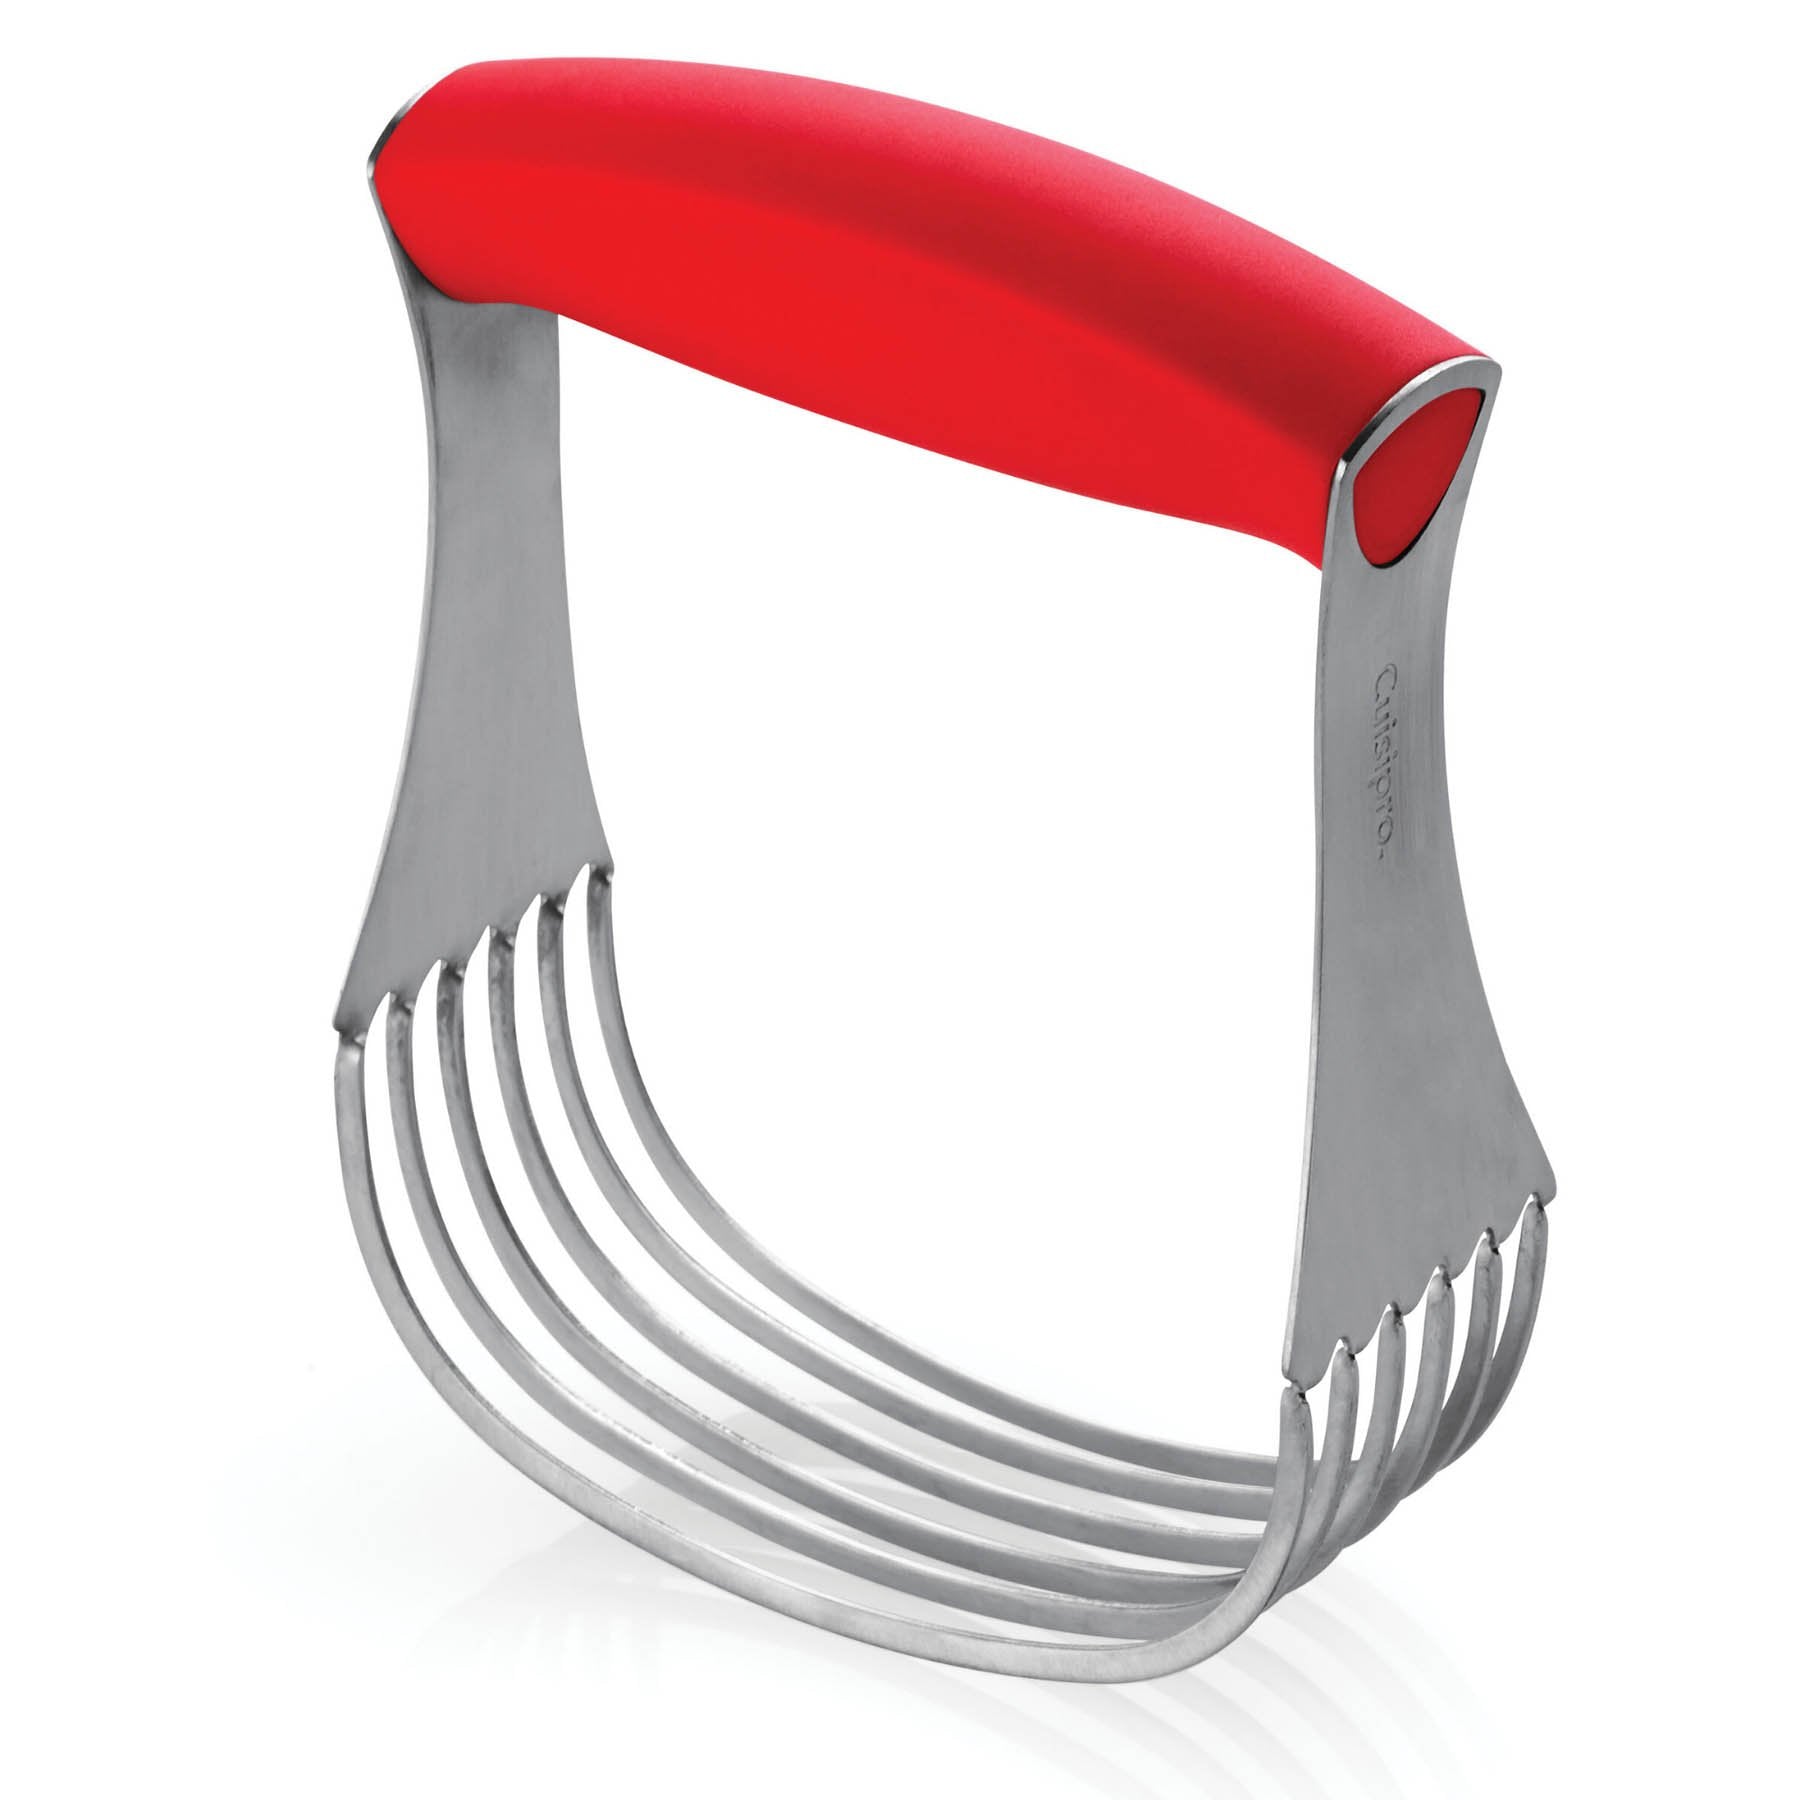 Stainless Steel Pastry Blender – Kiss the Cook